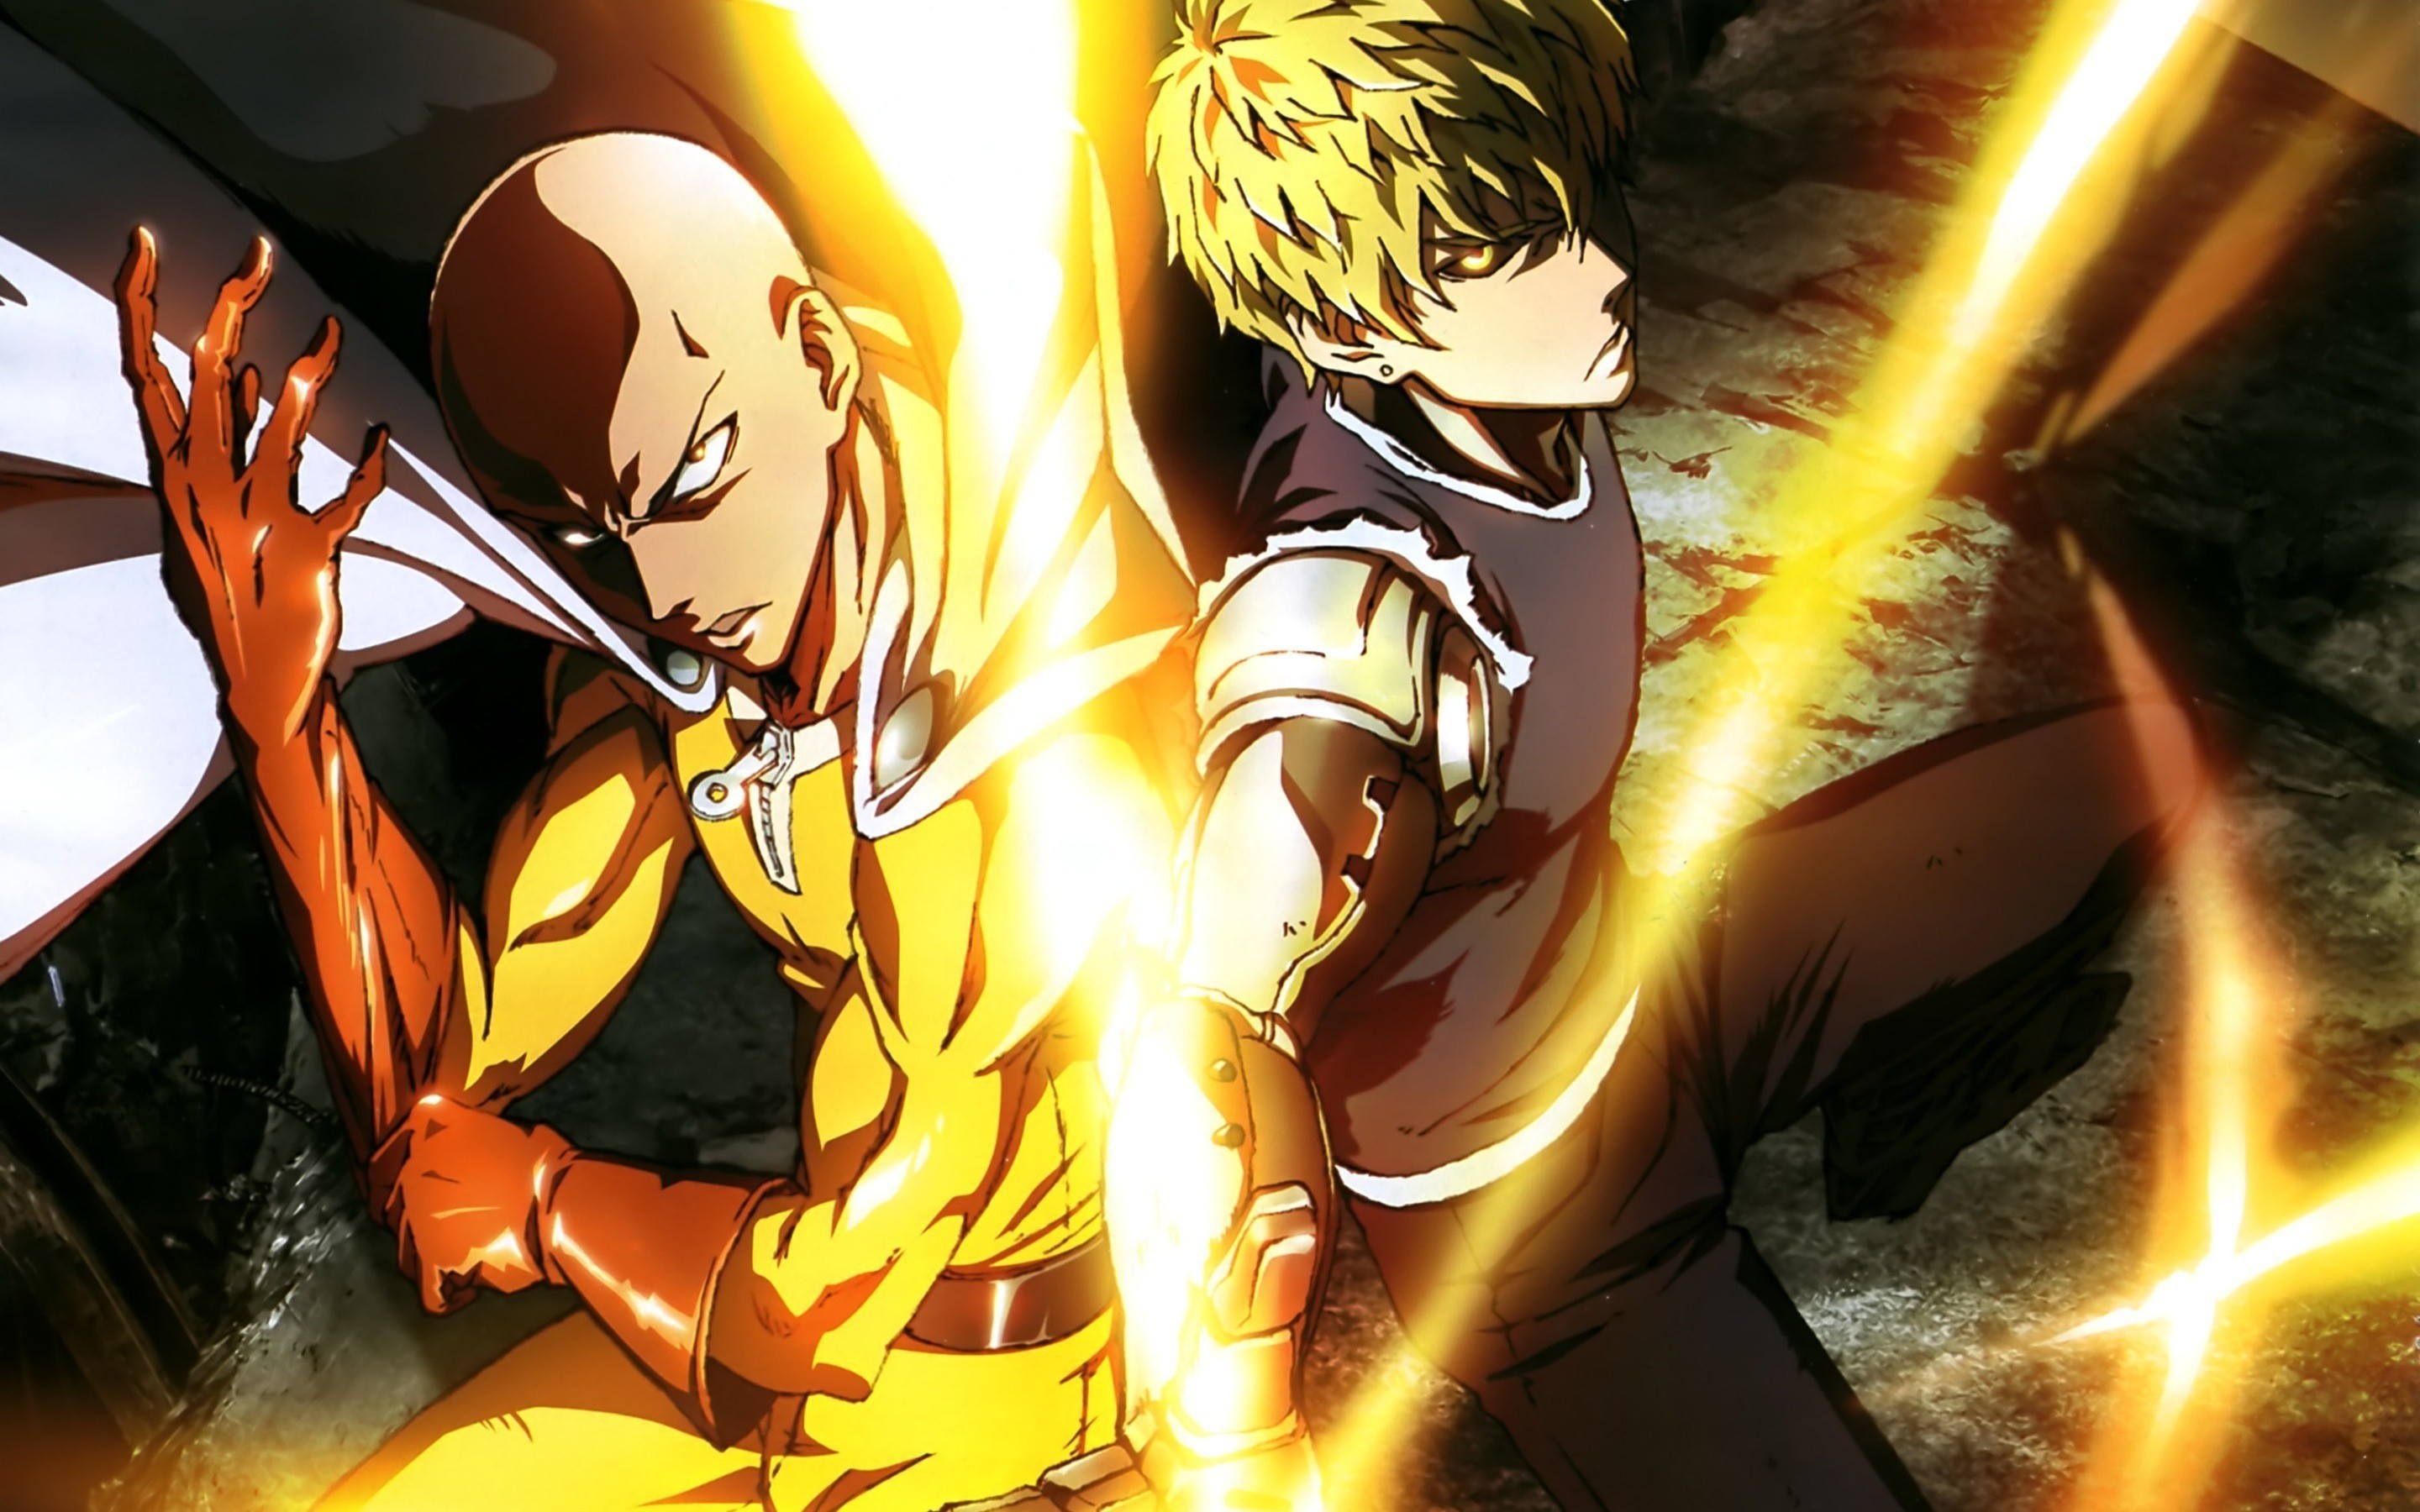 One Punch Man season 2 episode 4 preview, spoilers, release date and watch online